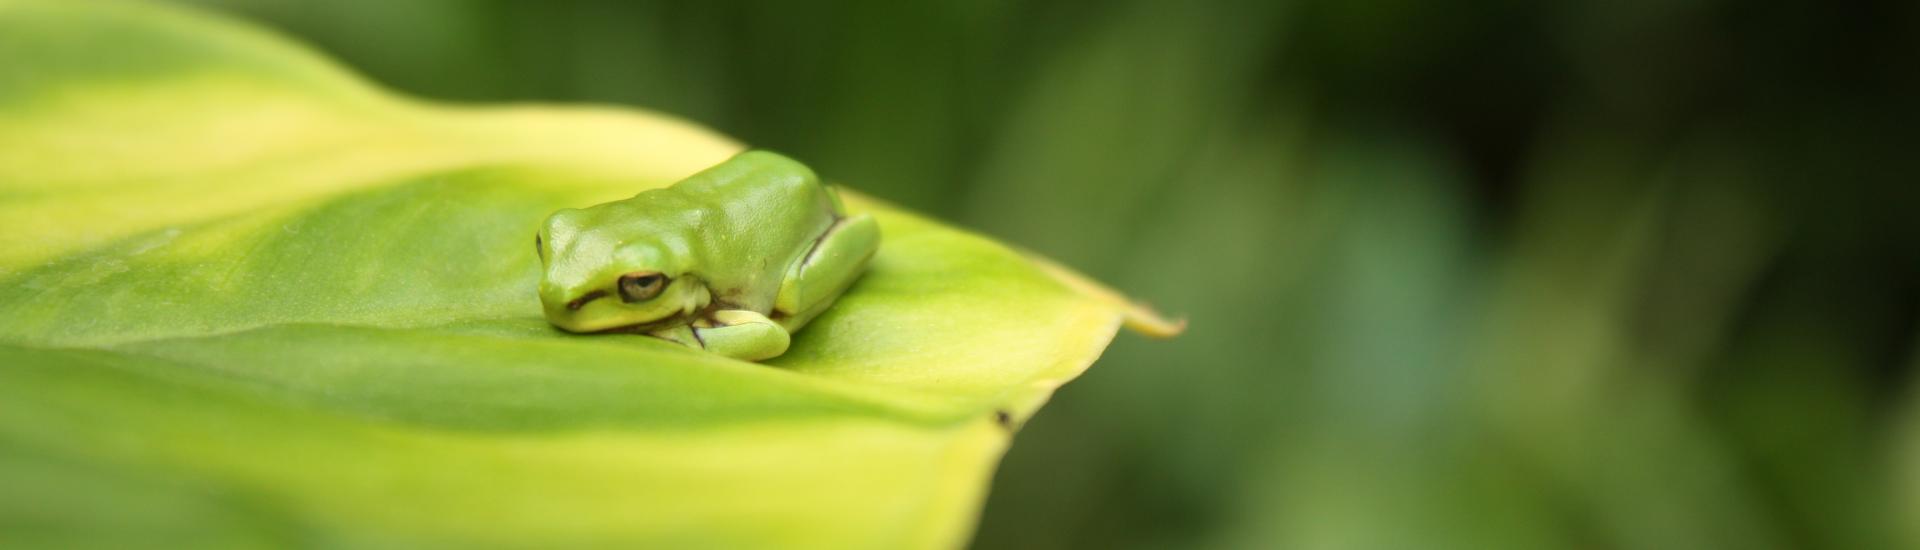 A green frog sitting on a green leaf with the background blurred